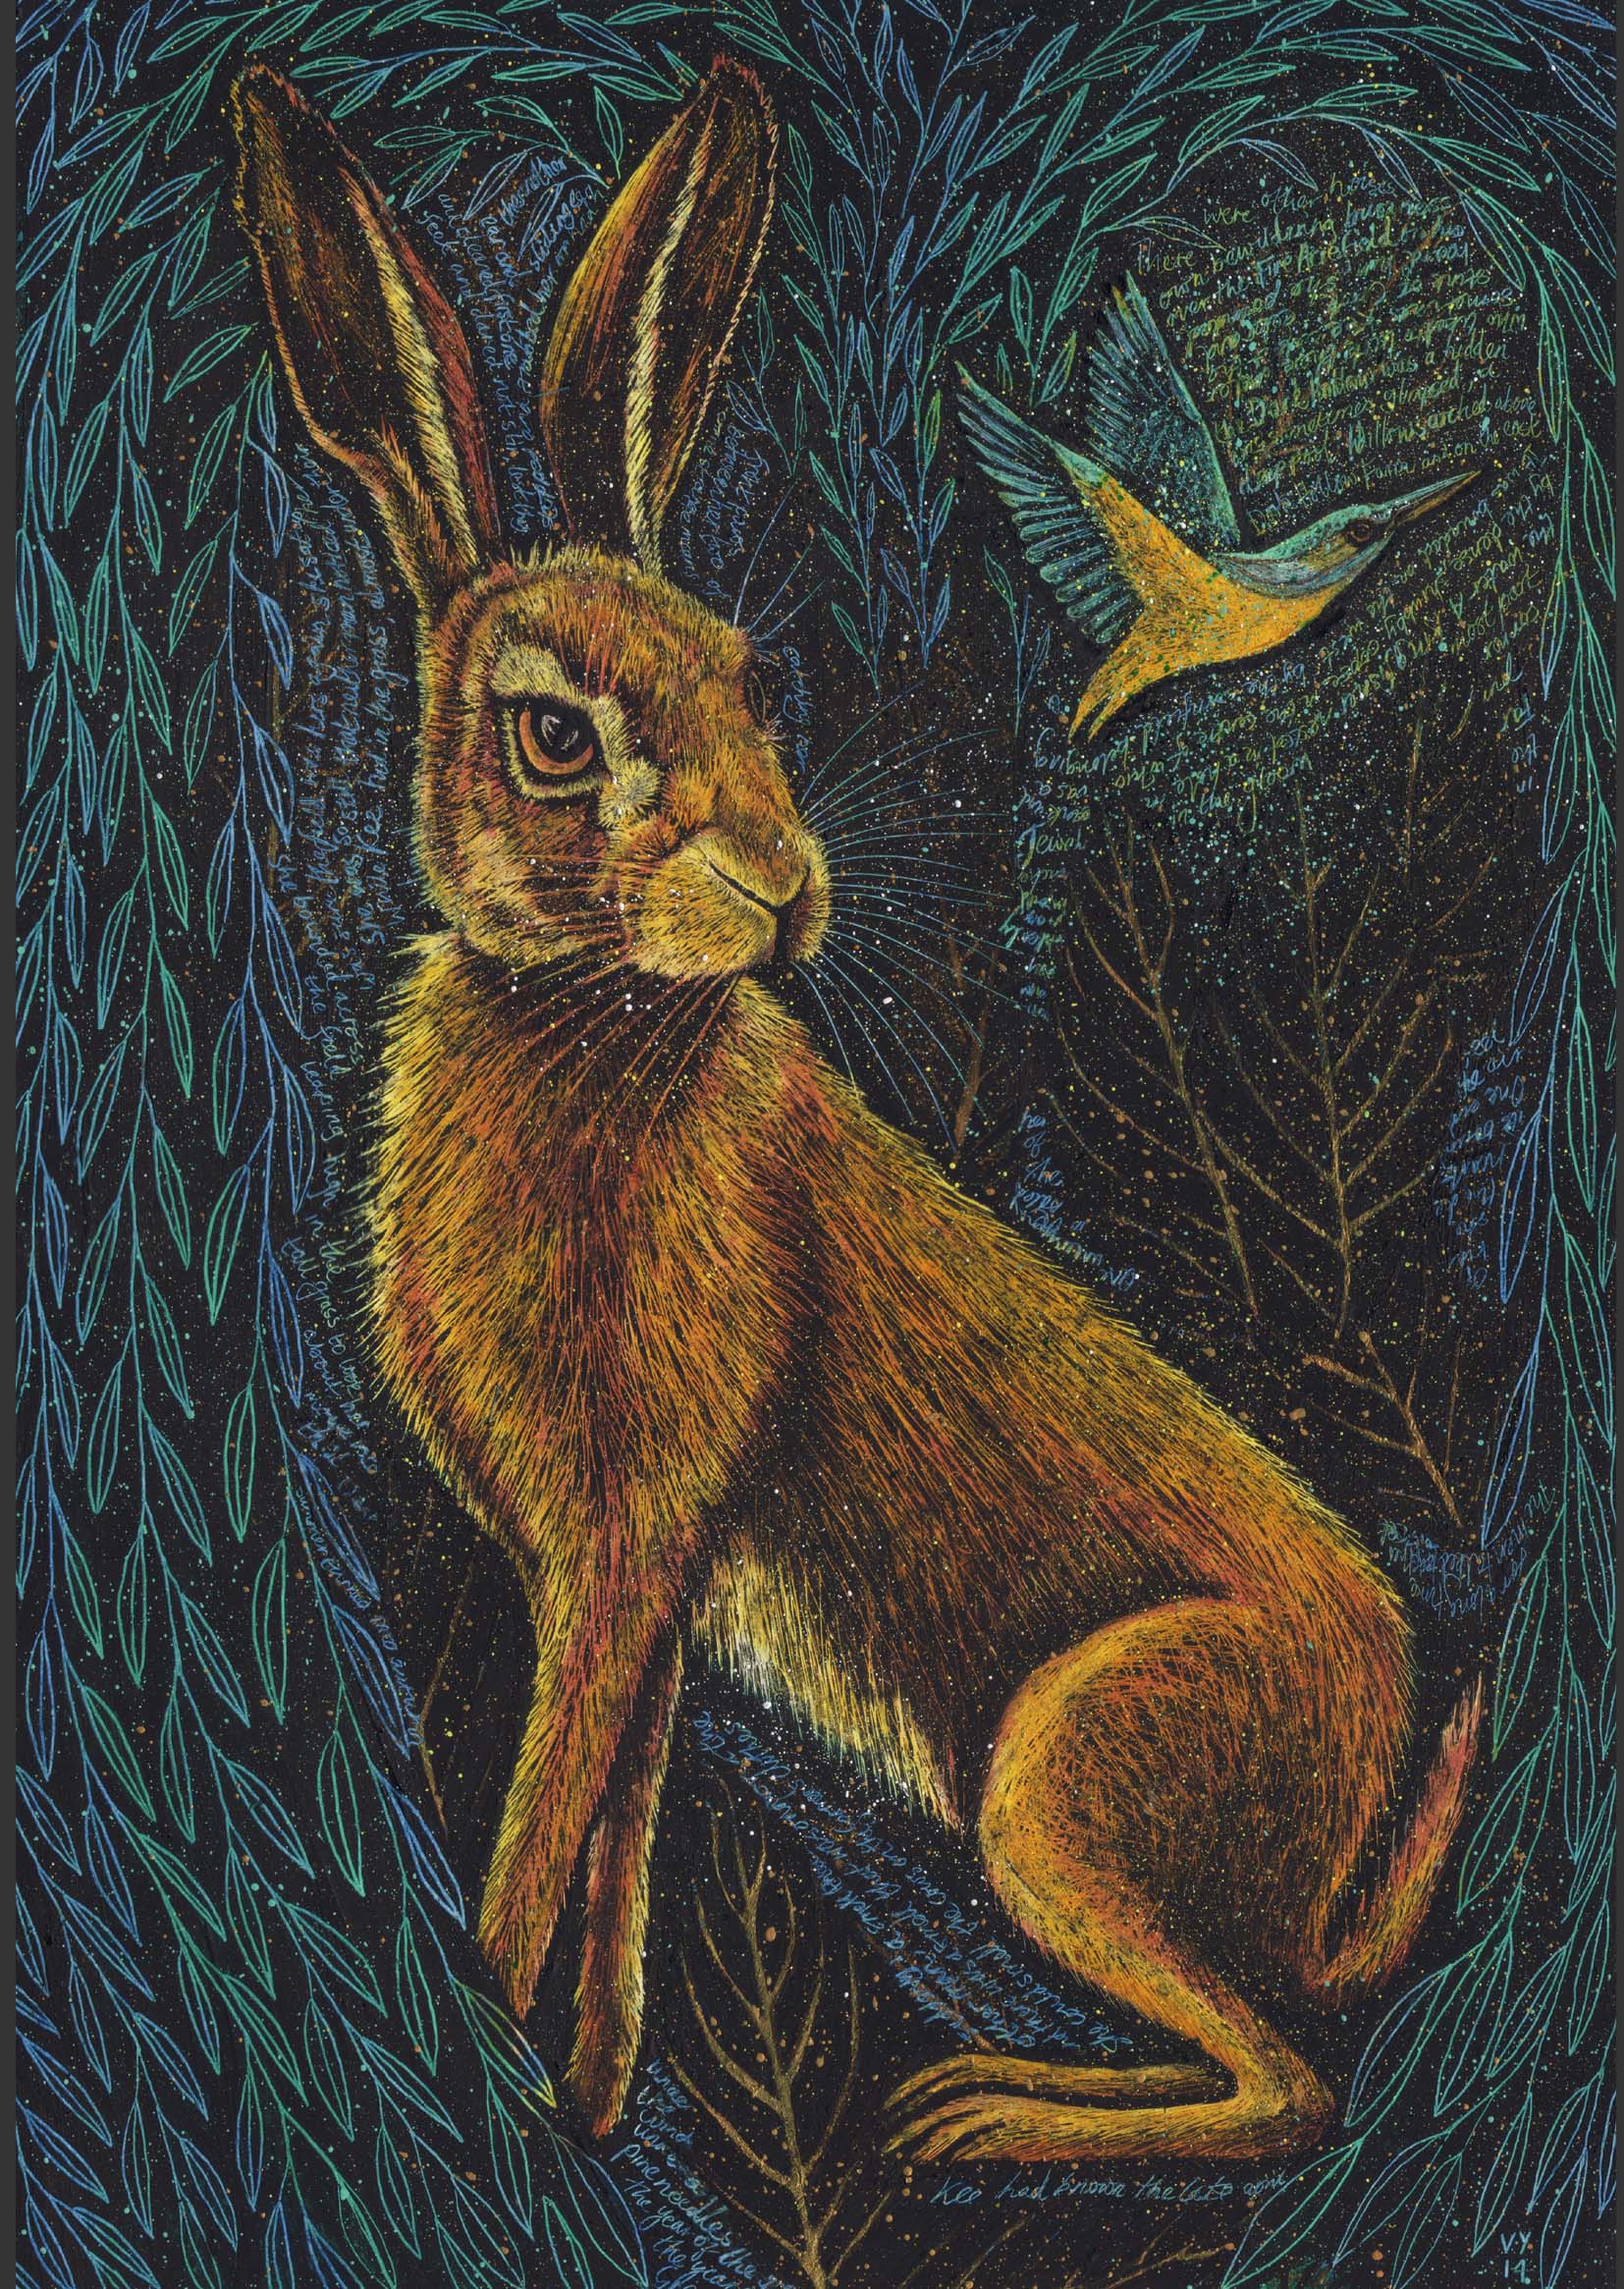 'The Hare at Dark Hollow' card